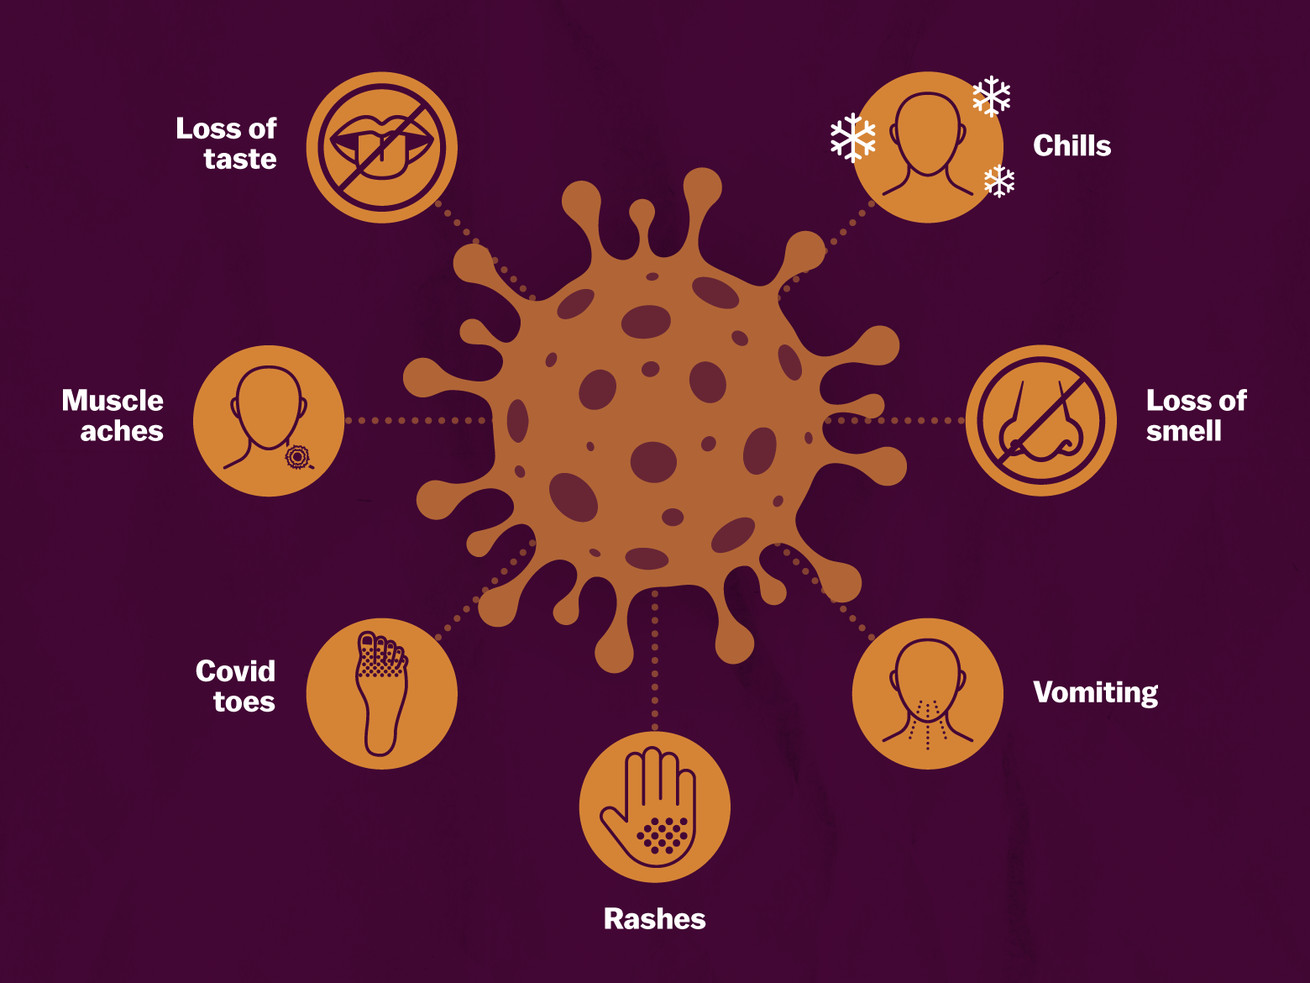 An illustration of the coronavirus surrounded by icons illustrating some of the symptoms associated with it.